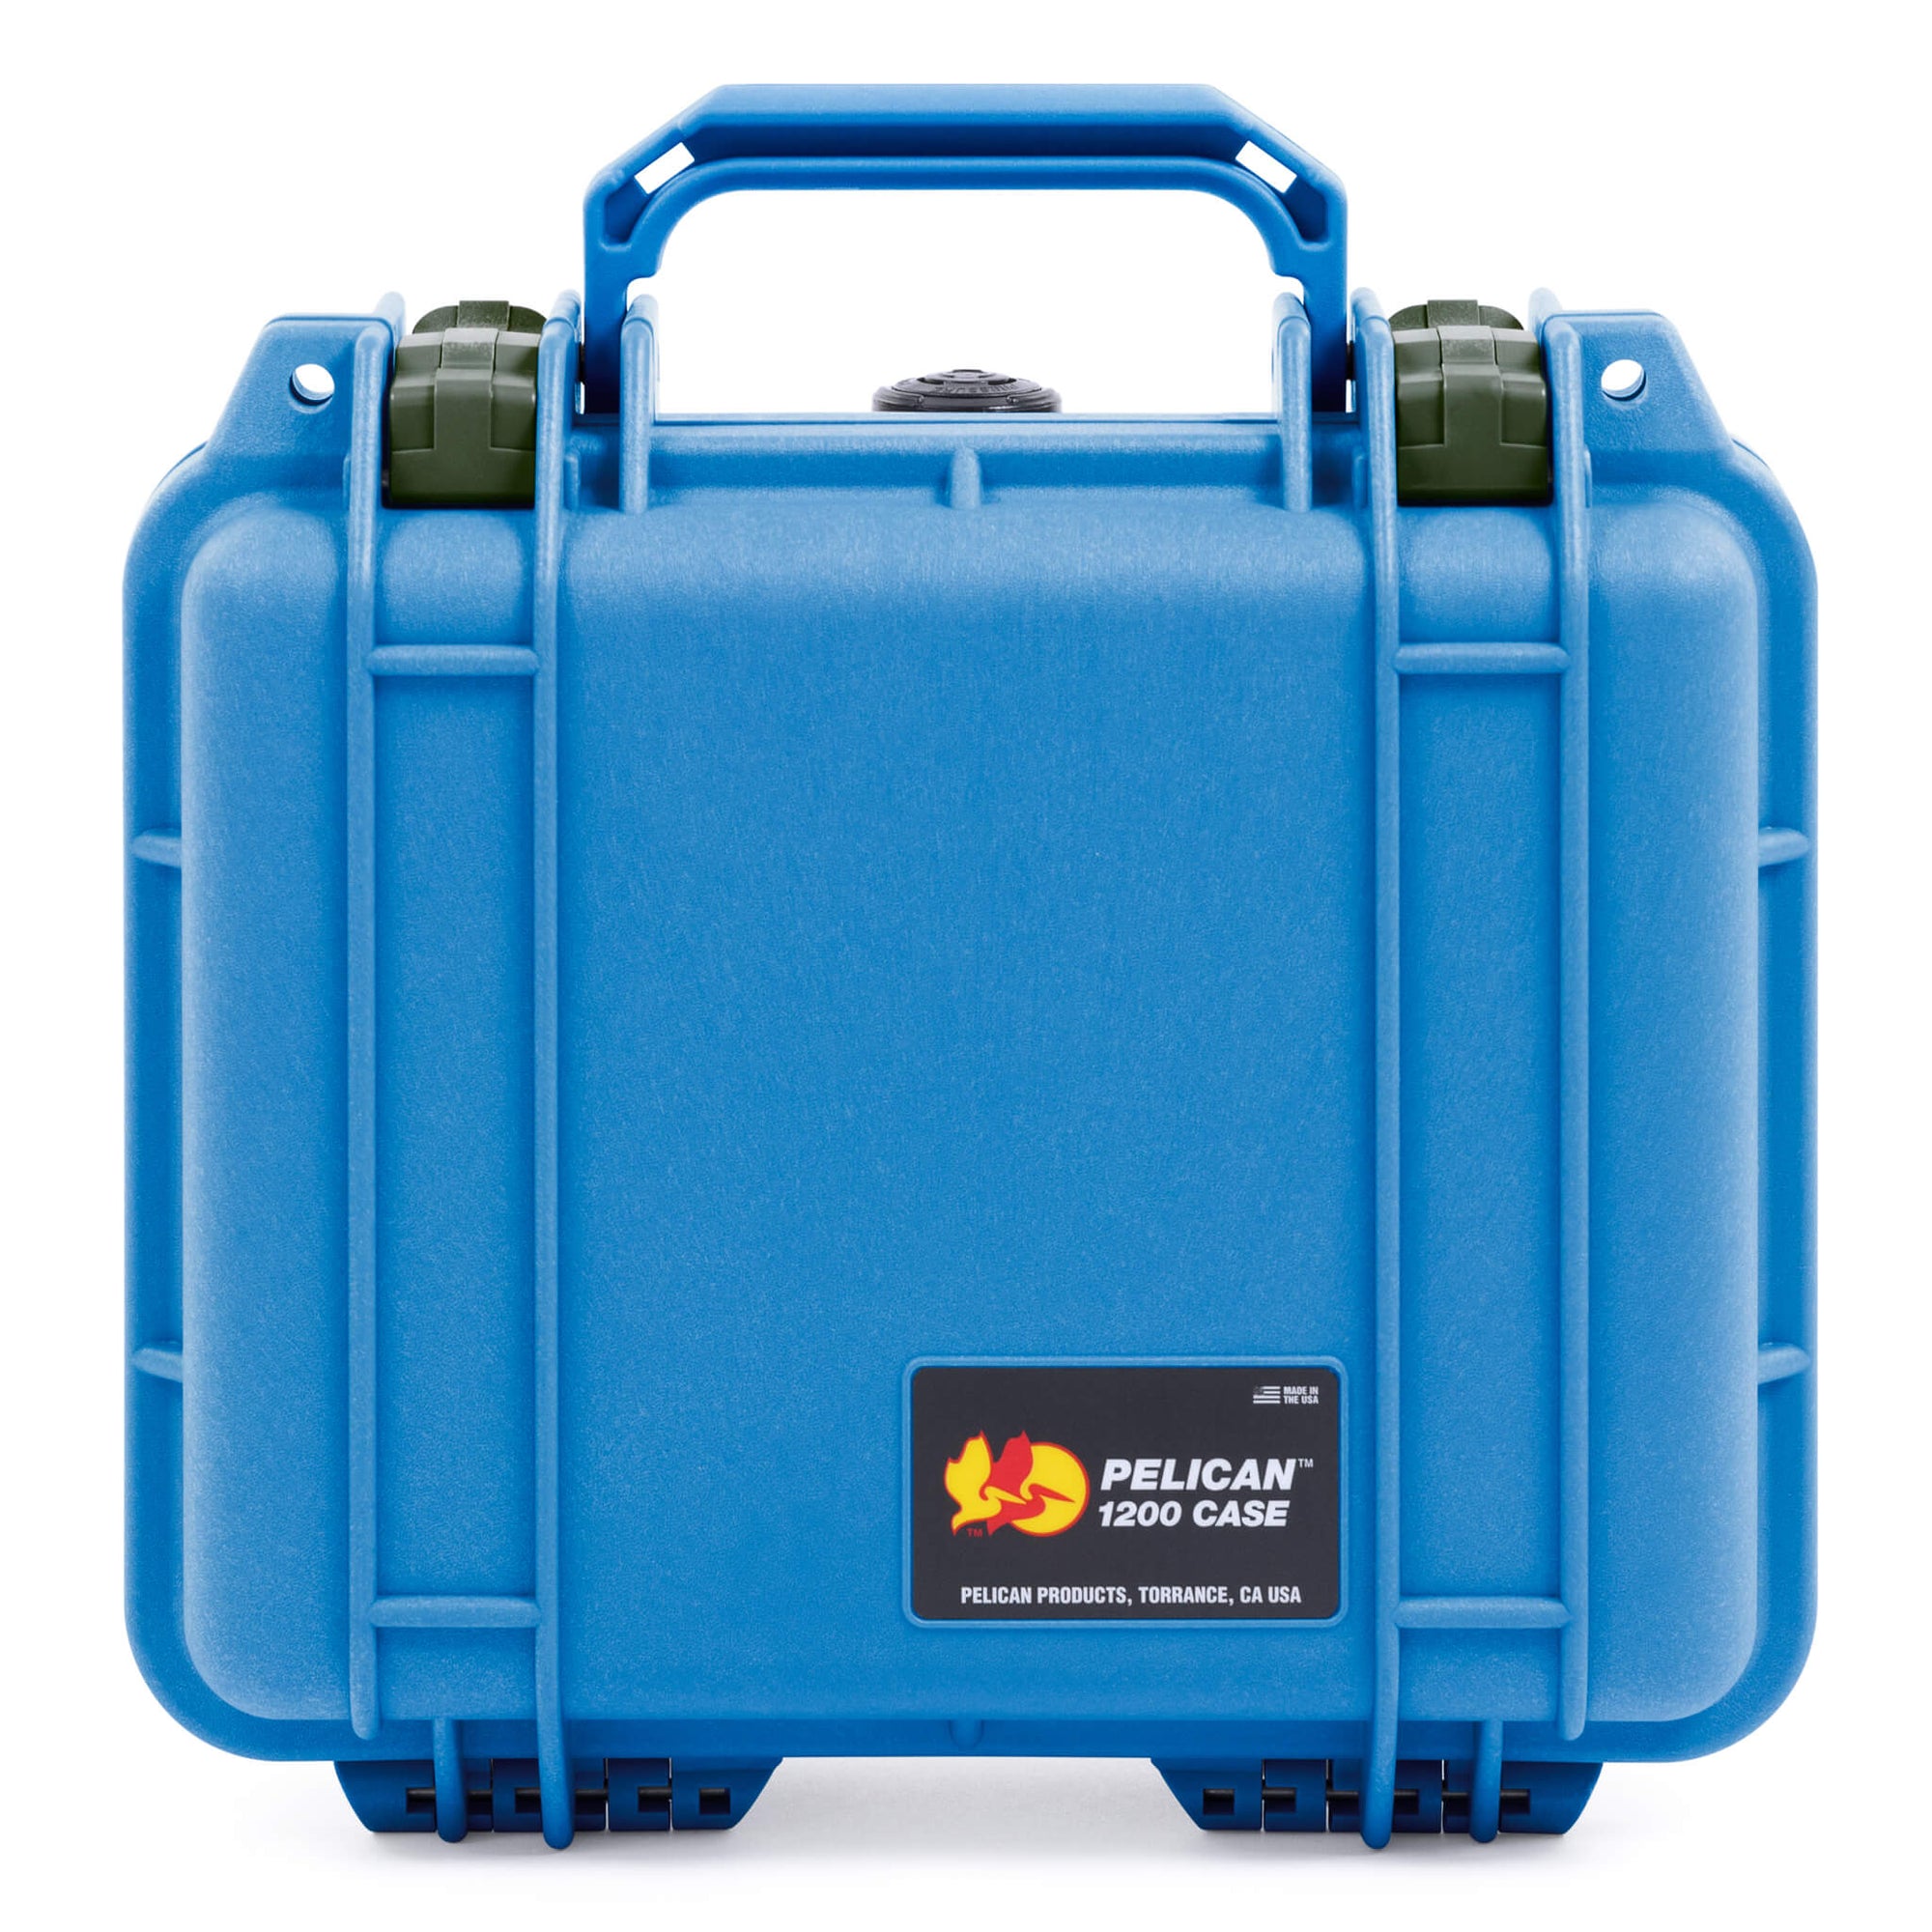 Pelican 1200 Case, Blue with OD Green Latches ColorCase 